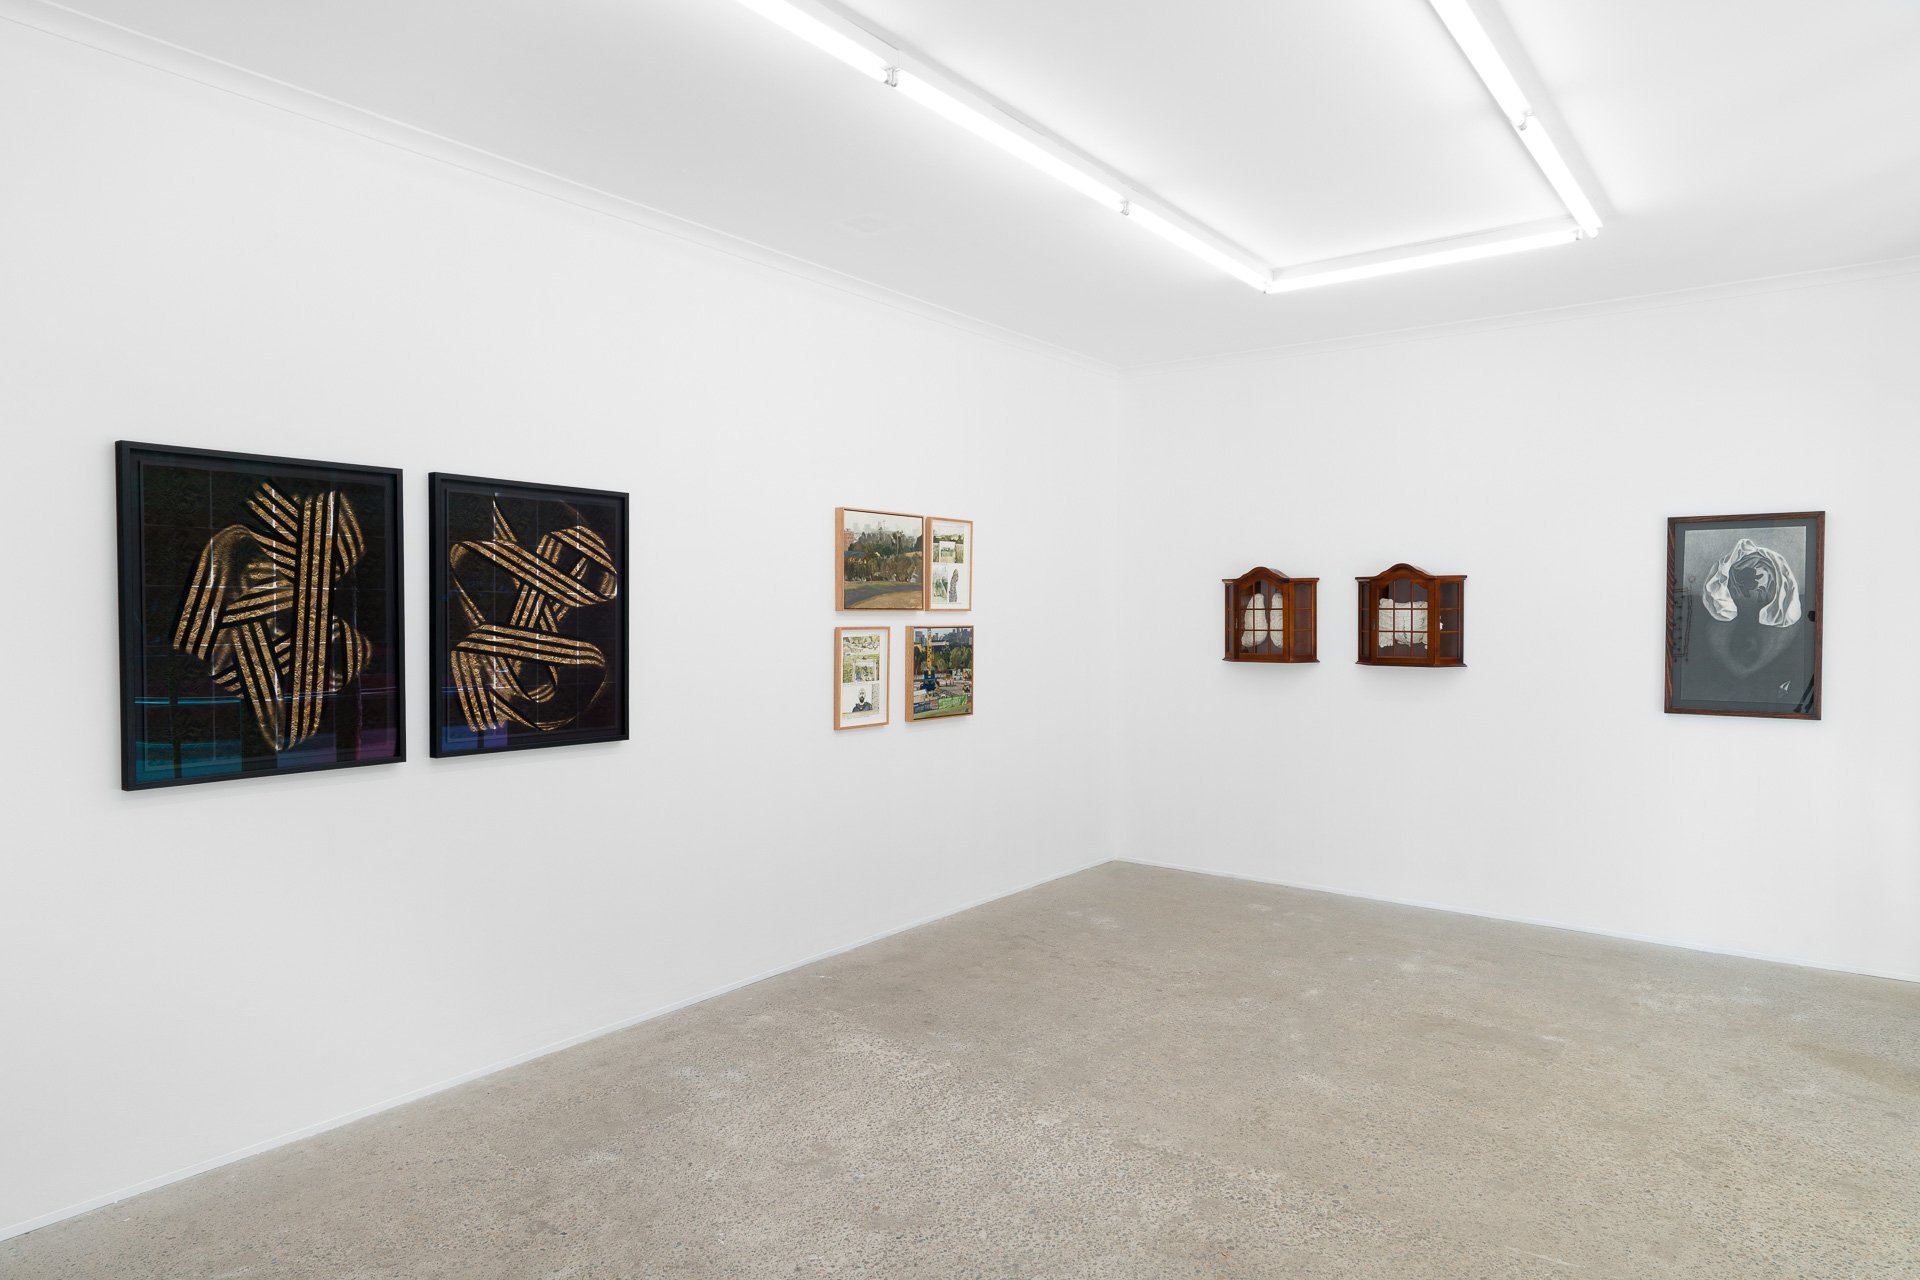 Installation View - Confabulations, Curated by Felipe Olivares